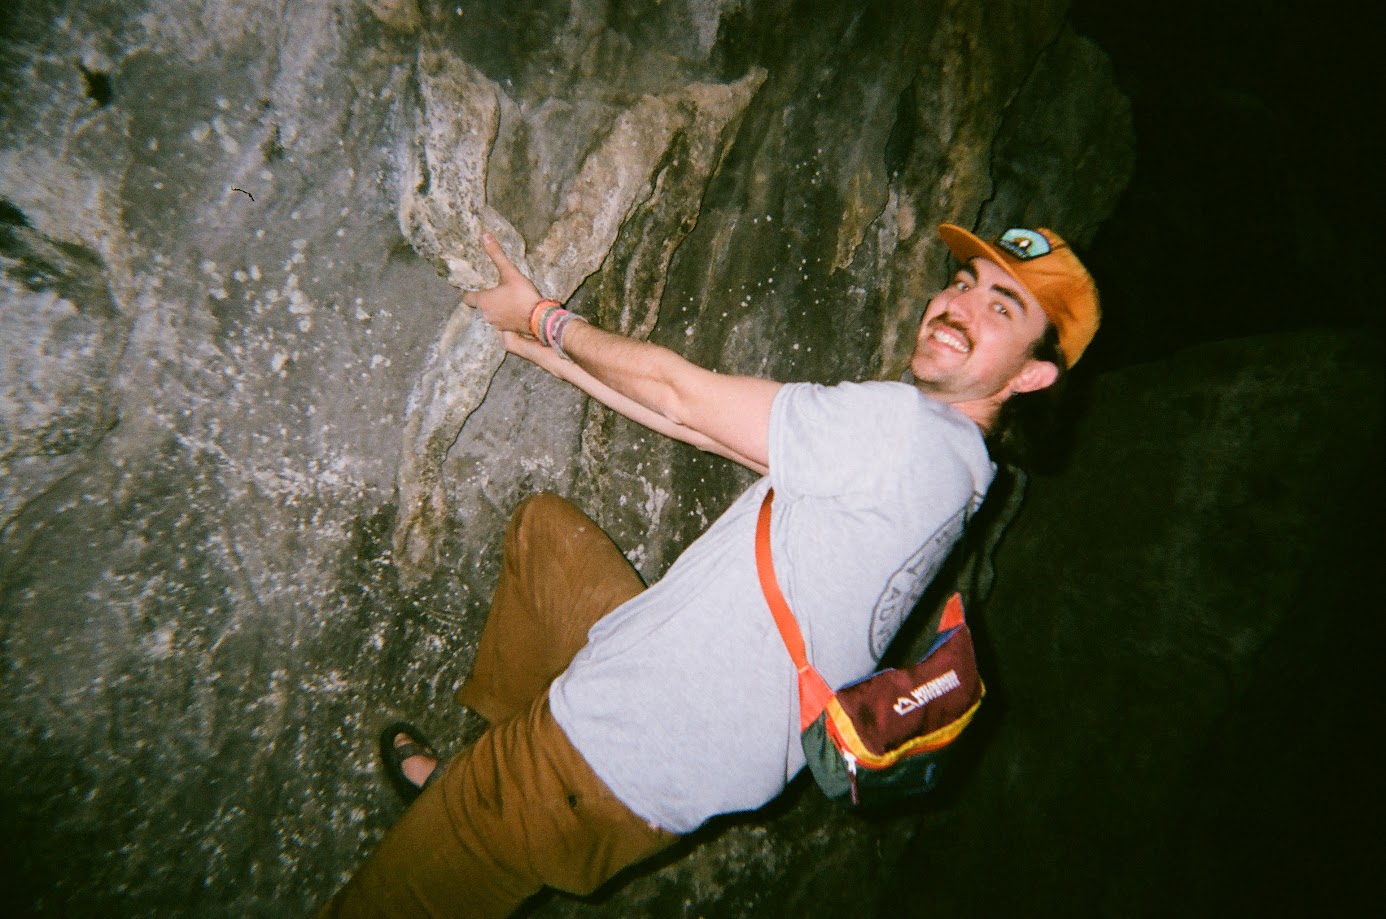 Man rock climbing in a cave smiling at the camera.